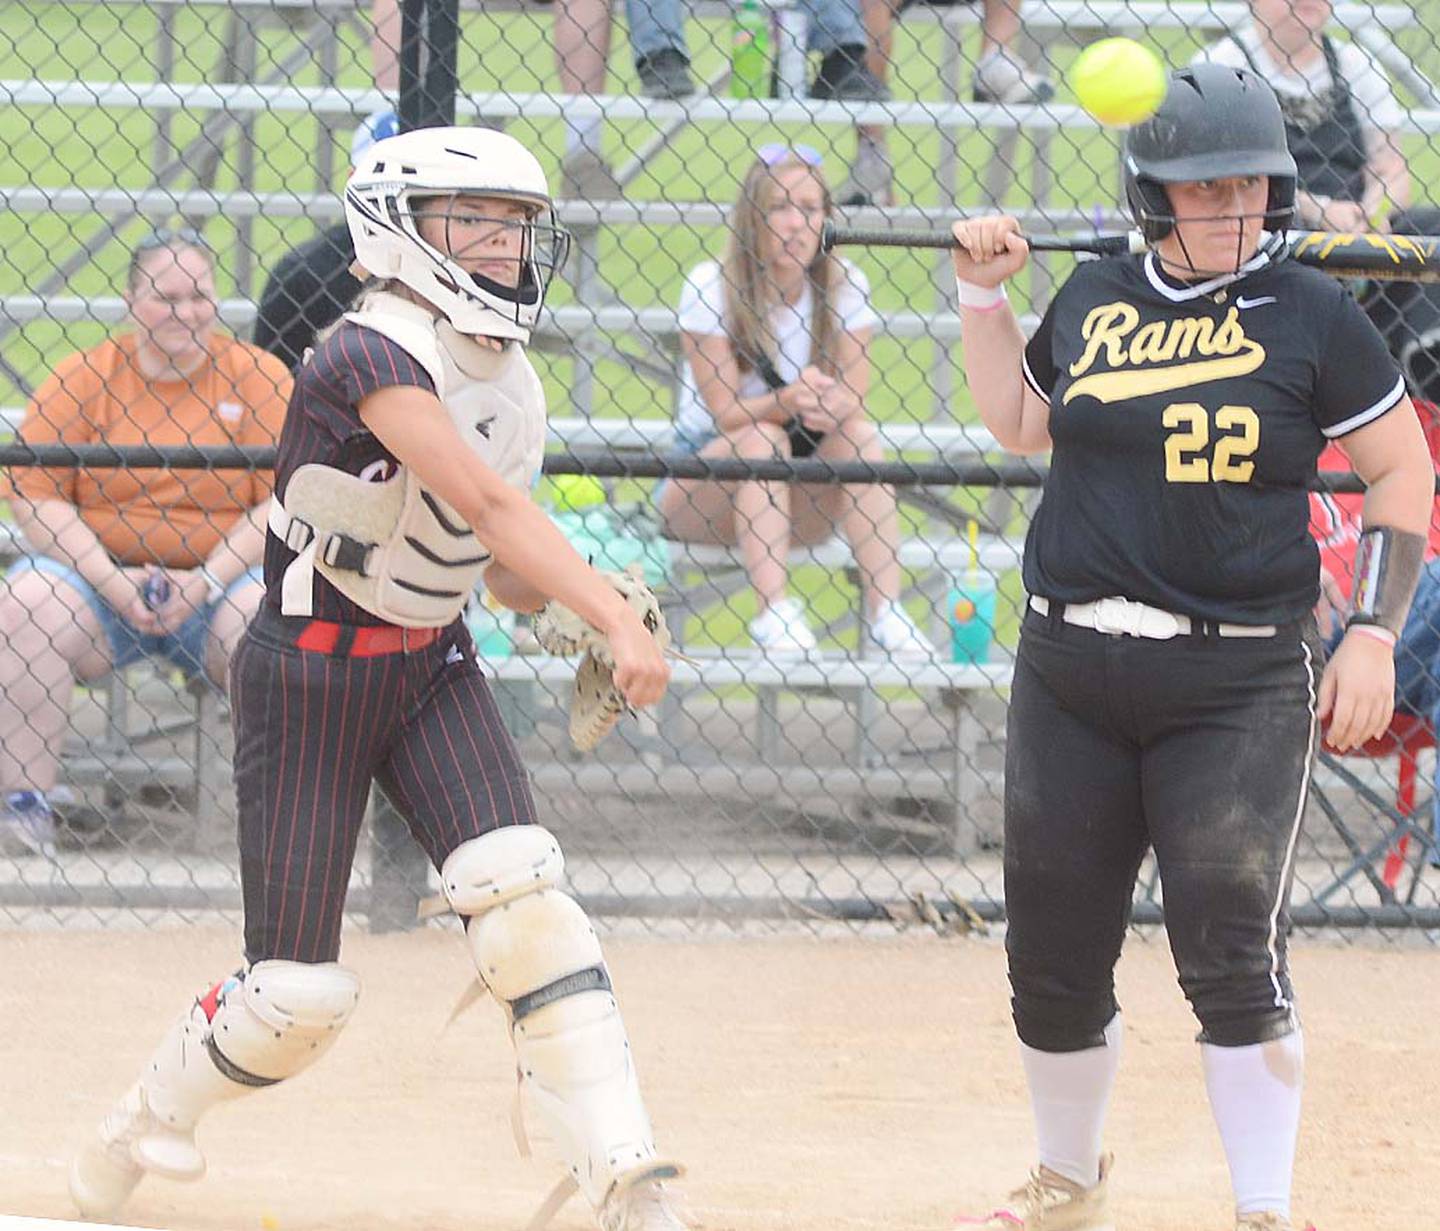 Creston catcher Ava Adamson fires a pickoff throw to first base during Thursday's 11-1 win over Glenwood. Adamson had three hits, including a home run.